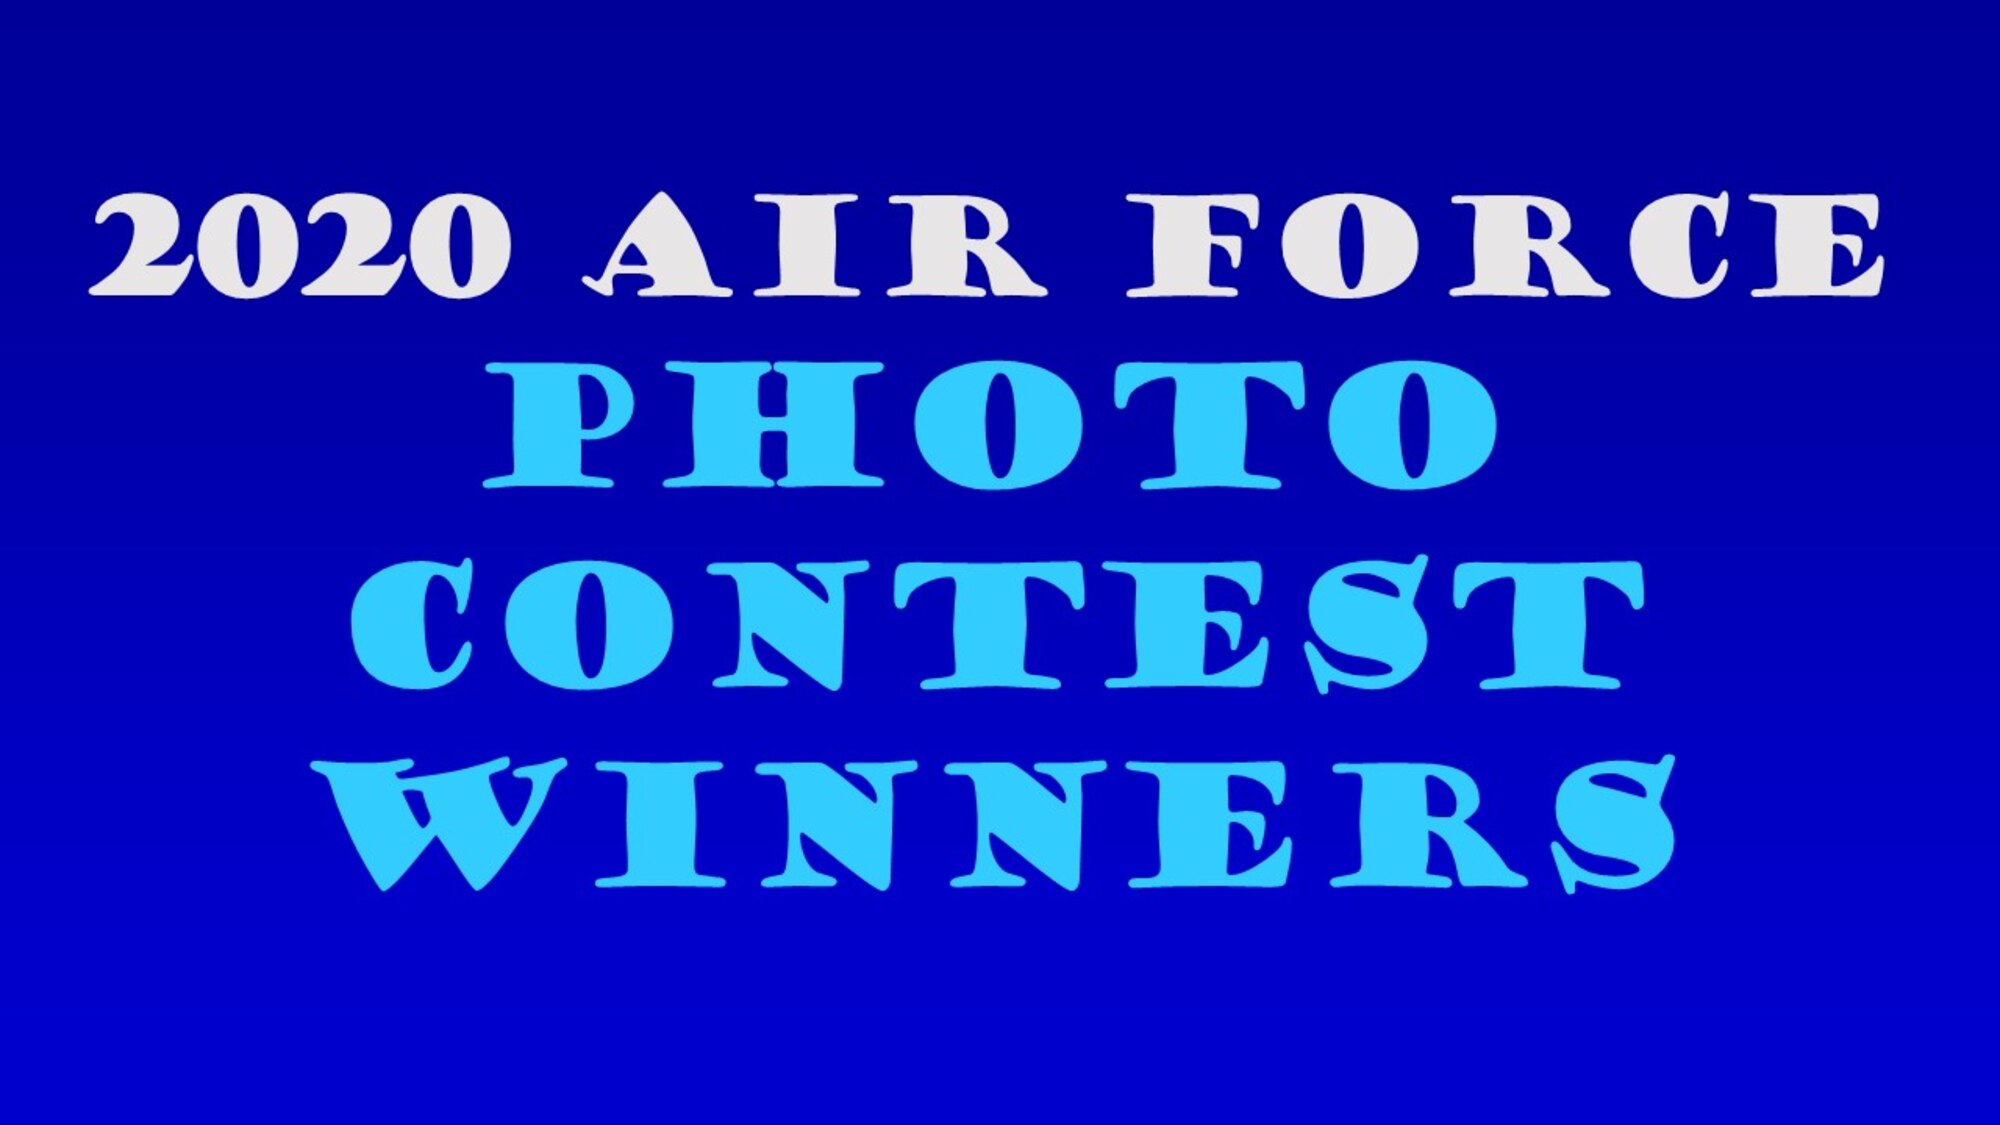 Congratulations to the 2020 Air Force Art Contest winners.